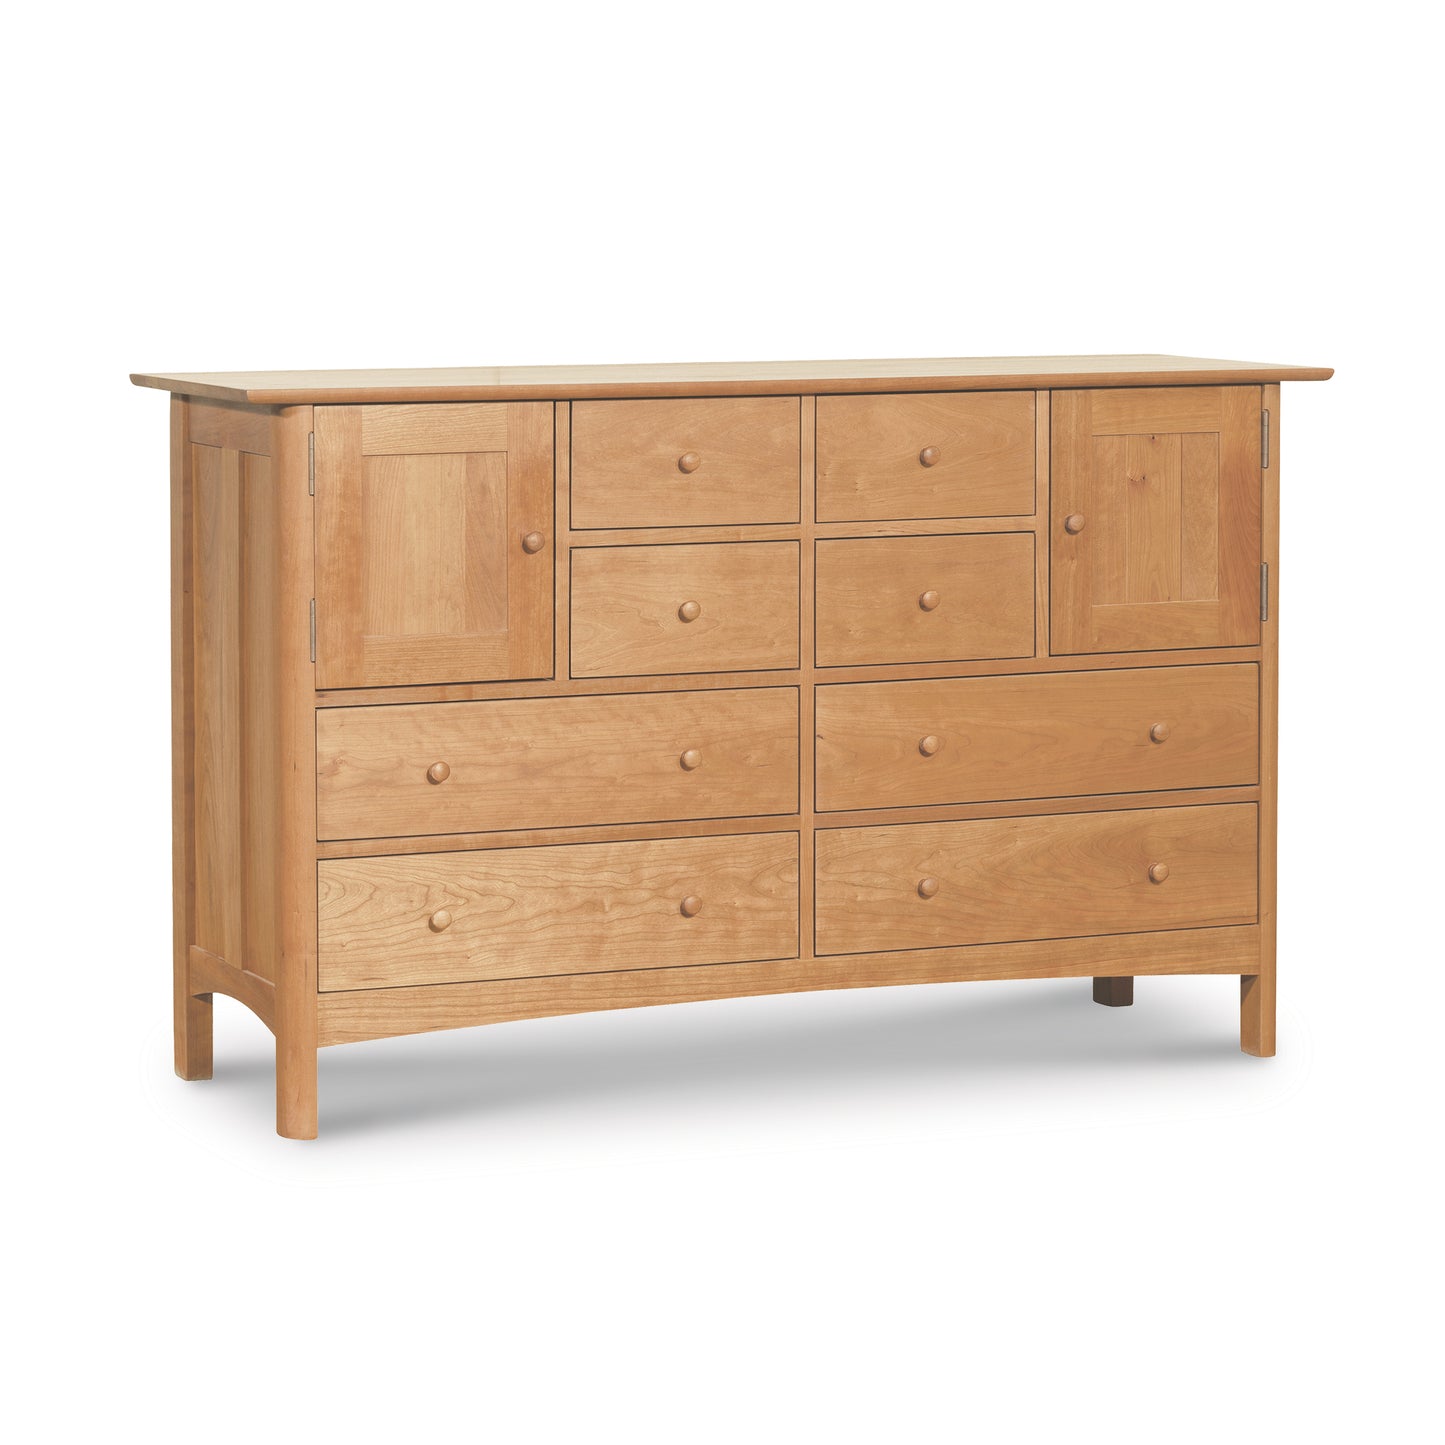 A Vermont Furniture Designs Heartwood Shaker 8-Drawer 2-Door Dresser made from solid cherry maple walnut wood, featuring multiple drawers of varying sizes and an eco-friendly oil finish against a white background.